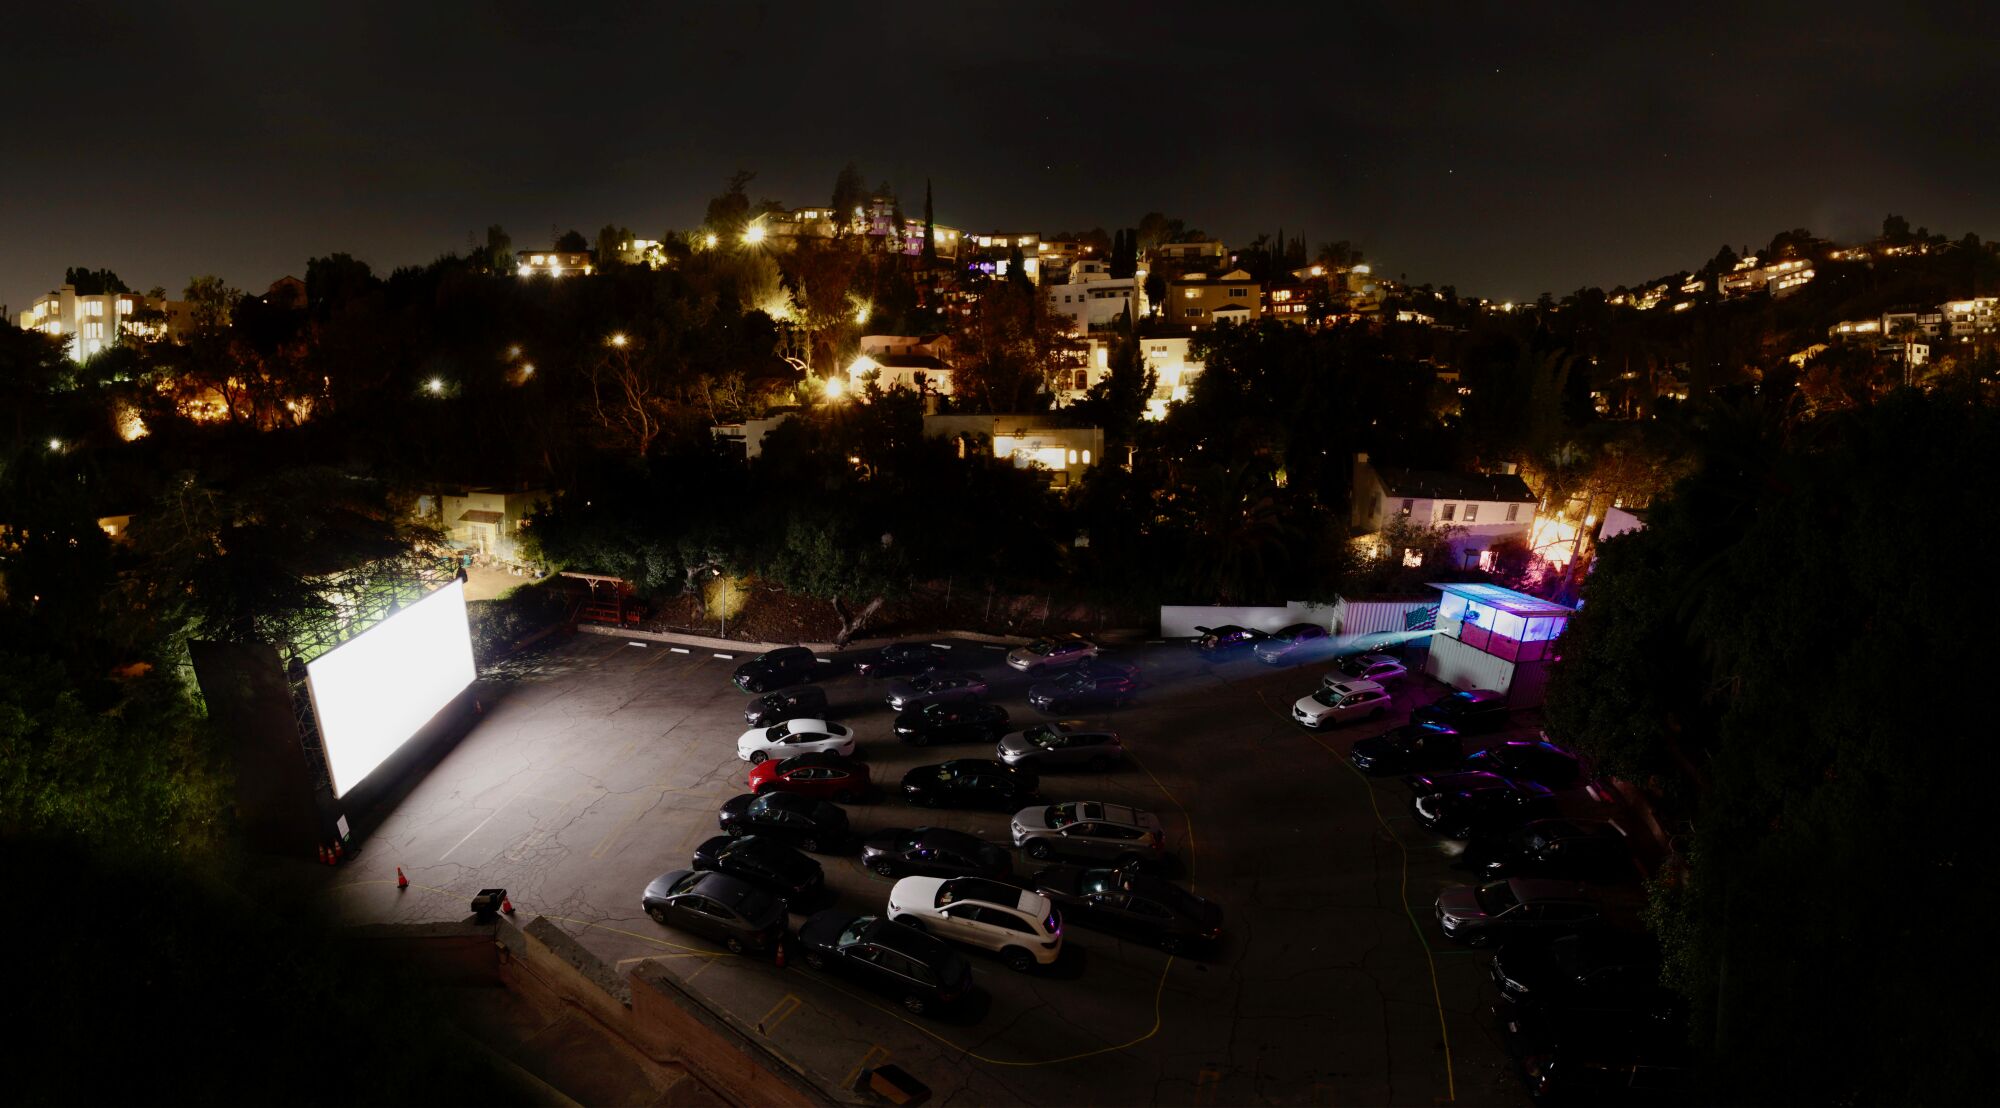 A view from above of cars parked in front of an outdoor movie screen